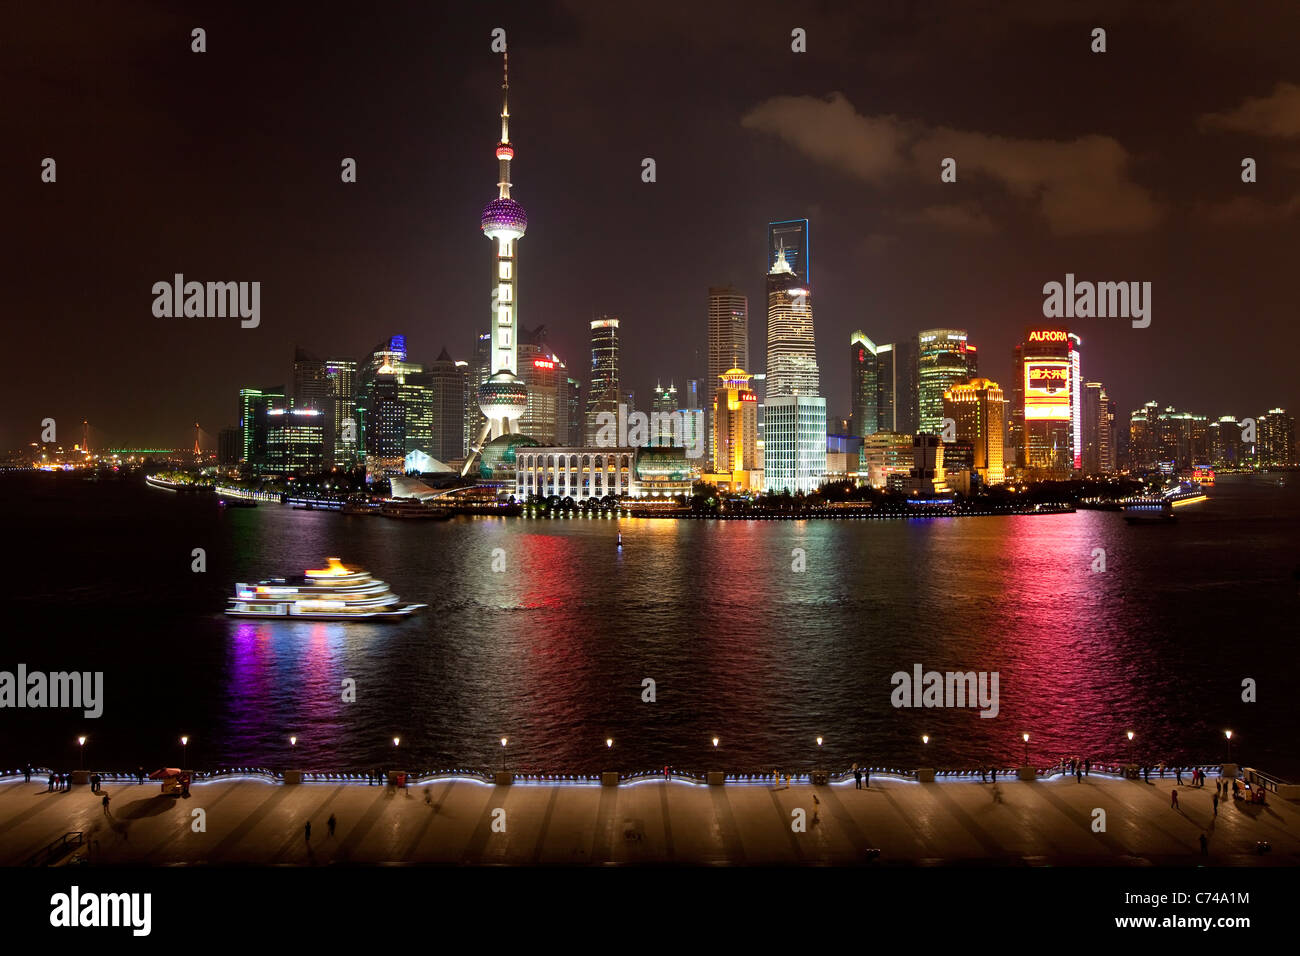 New Pudong skyline, looking across the Huangpu River from the Bund, Shanghai, China Stock Photo